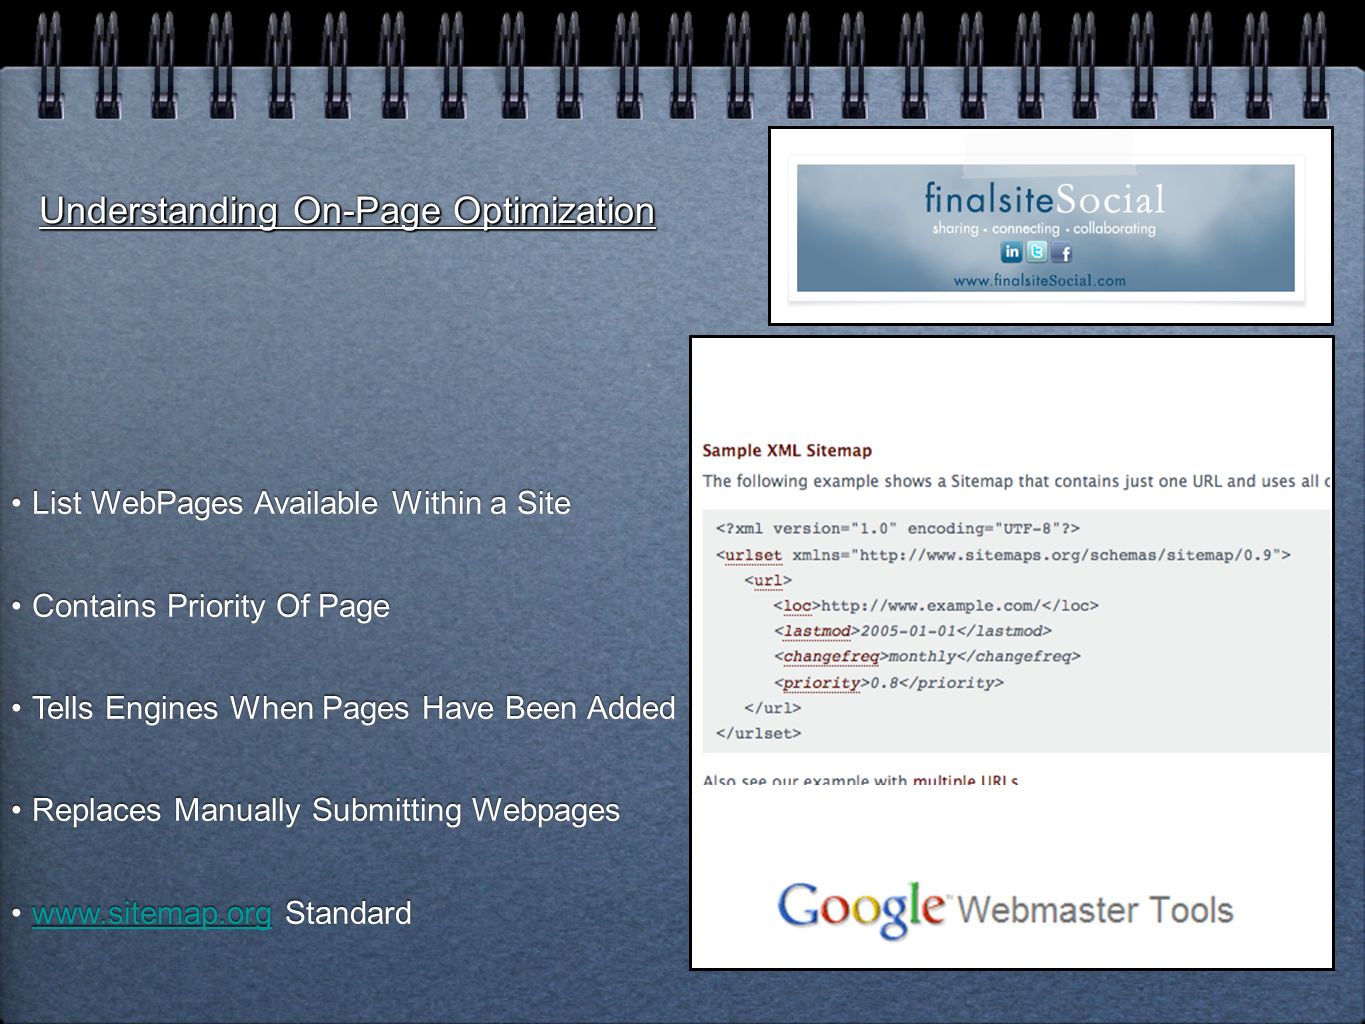 Understanding On-Page Optimization List WebPages Available Within a Site Contains Priority Of Page Tells Engines When Pages Have Been Added Replaces Manually Submitting Webpages   Standardwww.sitemap.org List WebPages Available Within a Site Contains Priority Of Page Tells Engines When Pages Have Been Added Replaces Manually Submitting Webpages   Standardwww.sitemap.org